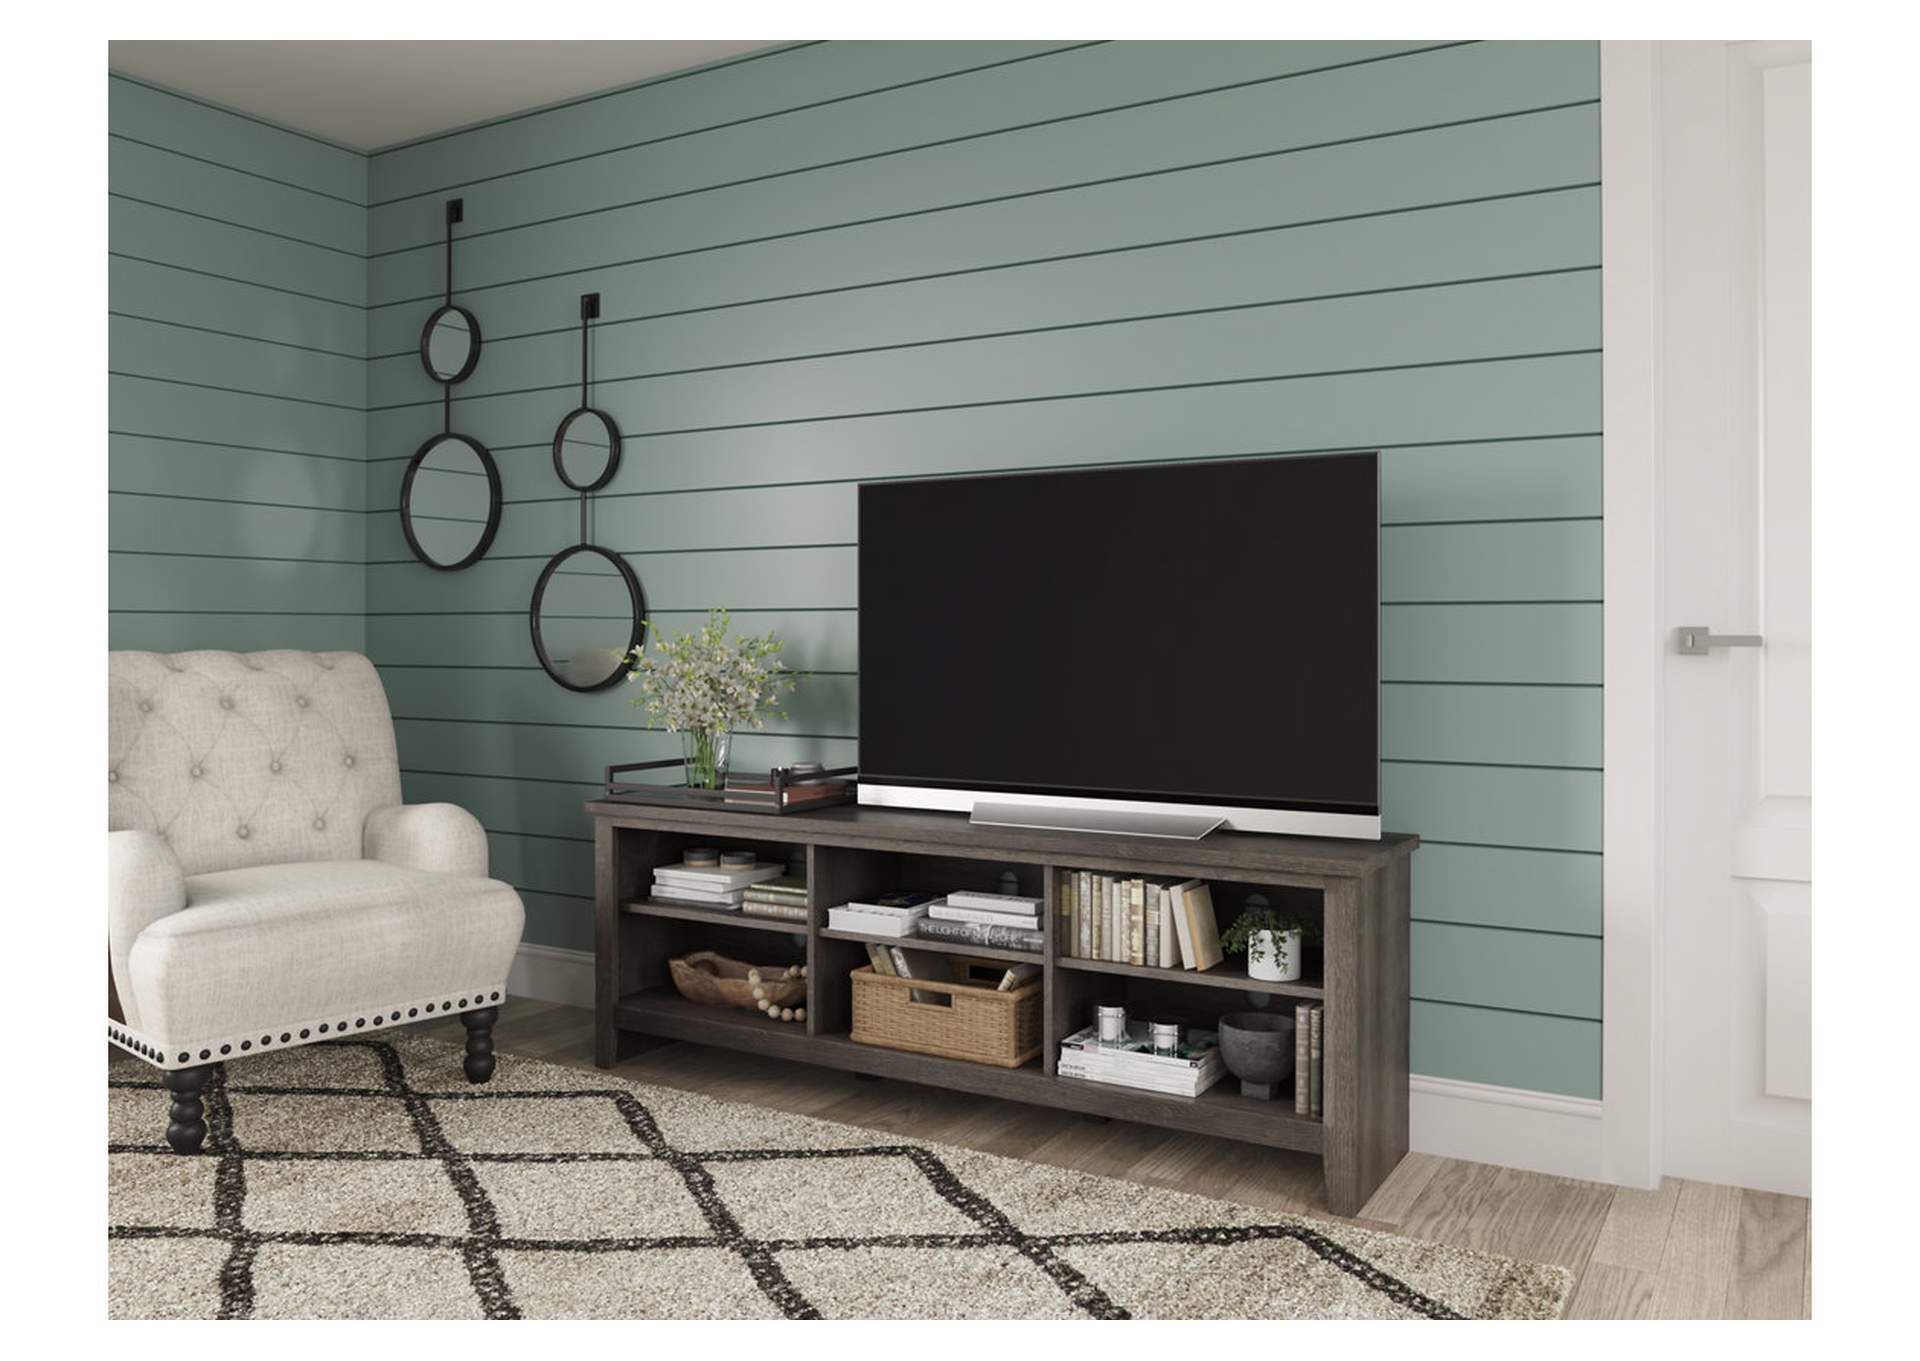 Arlenbry 70" TV Stand,Signature Design By Ashley